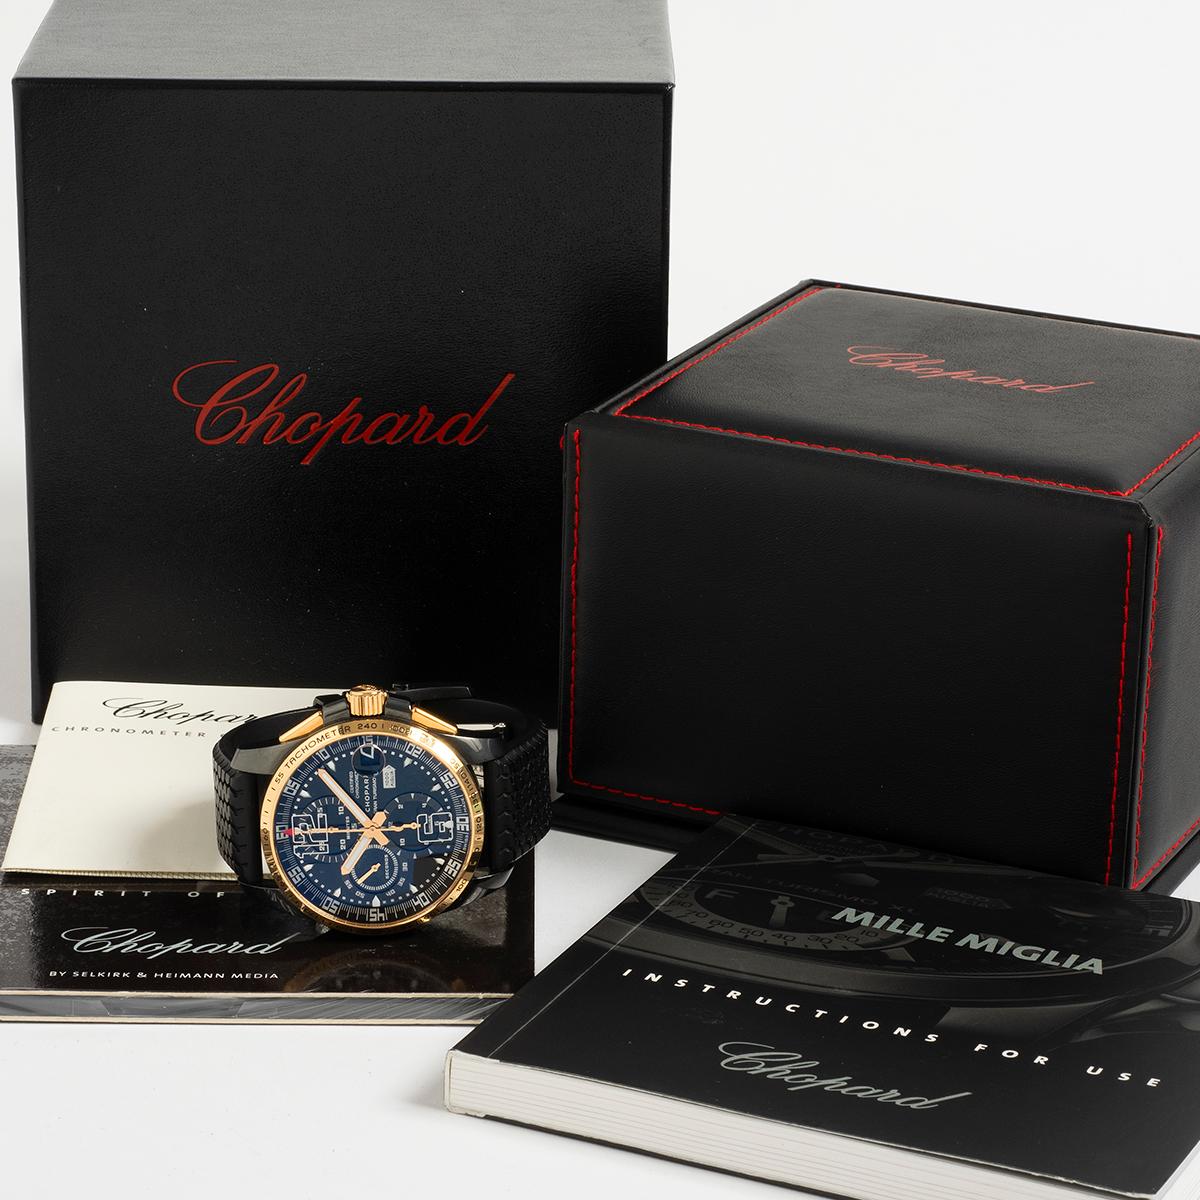 Our limited edition Chopard Mille Miglia Gran Turismo XL chronograph Speed Black reference 168459-6001 is one of 500 examples. Featuring a prominent and attractive 44mm case of DLC (blackened) steel and rose gold with black dial with silver indices,